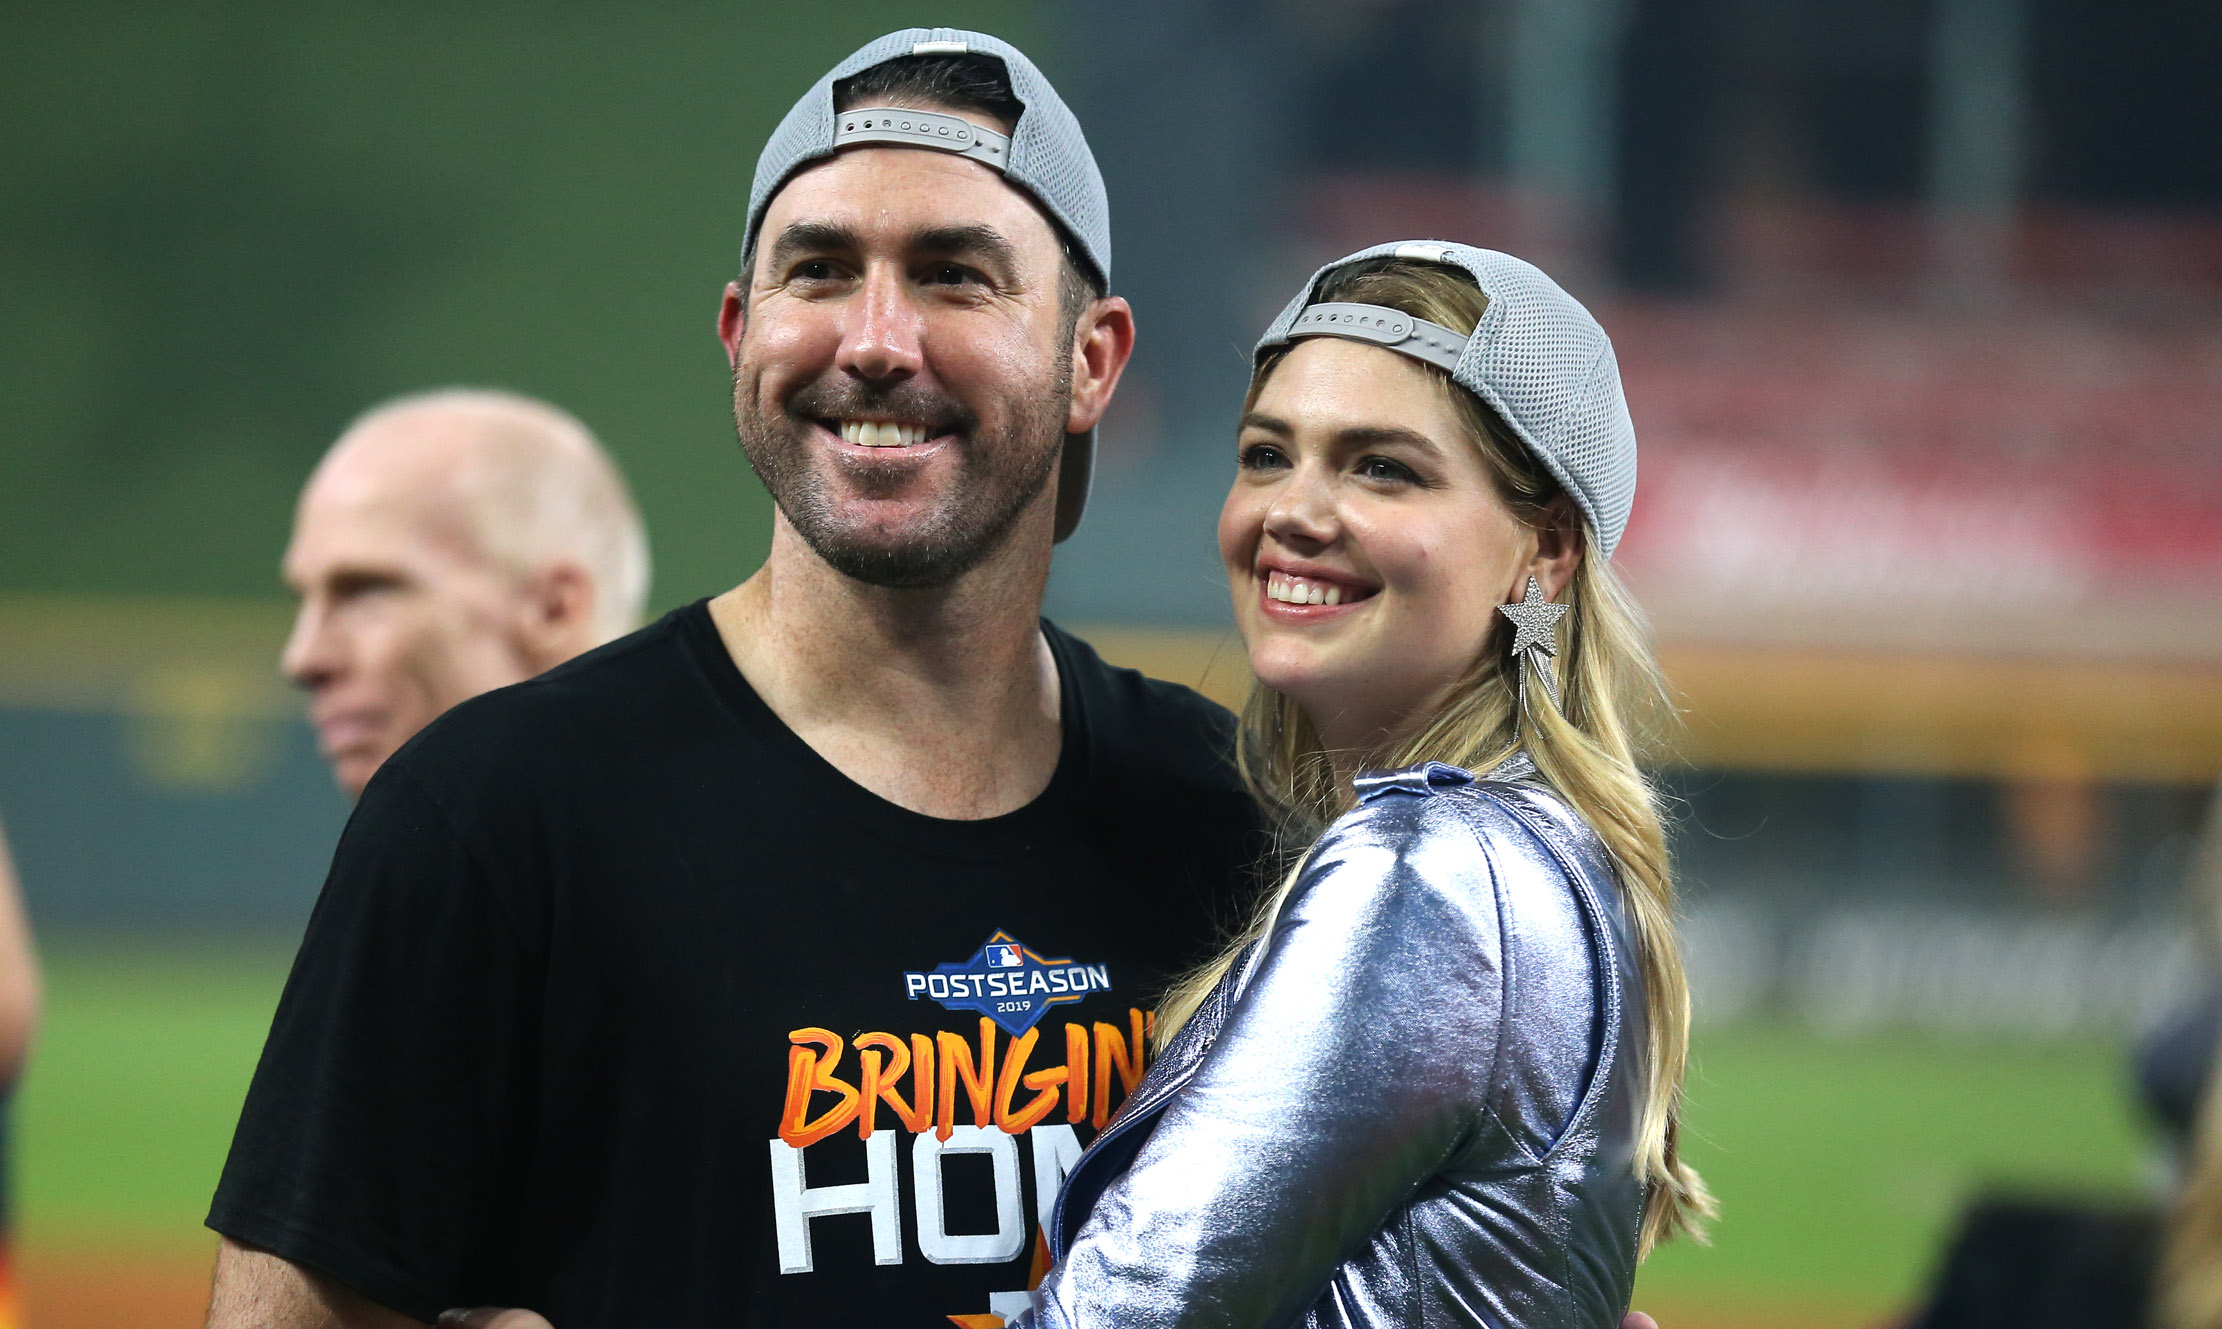 Kate Upton Crushed On Twitter For Justin Verlander A Happy Birthday - BroBible